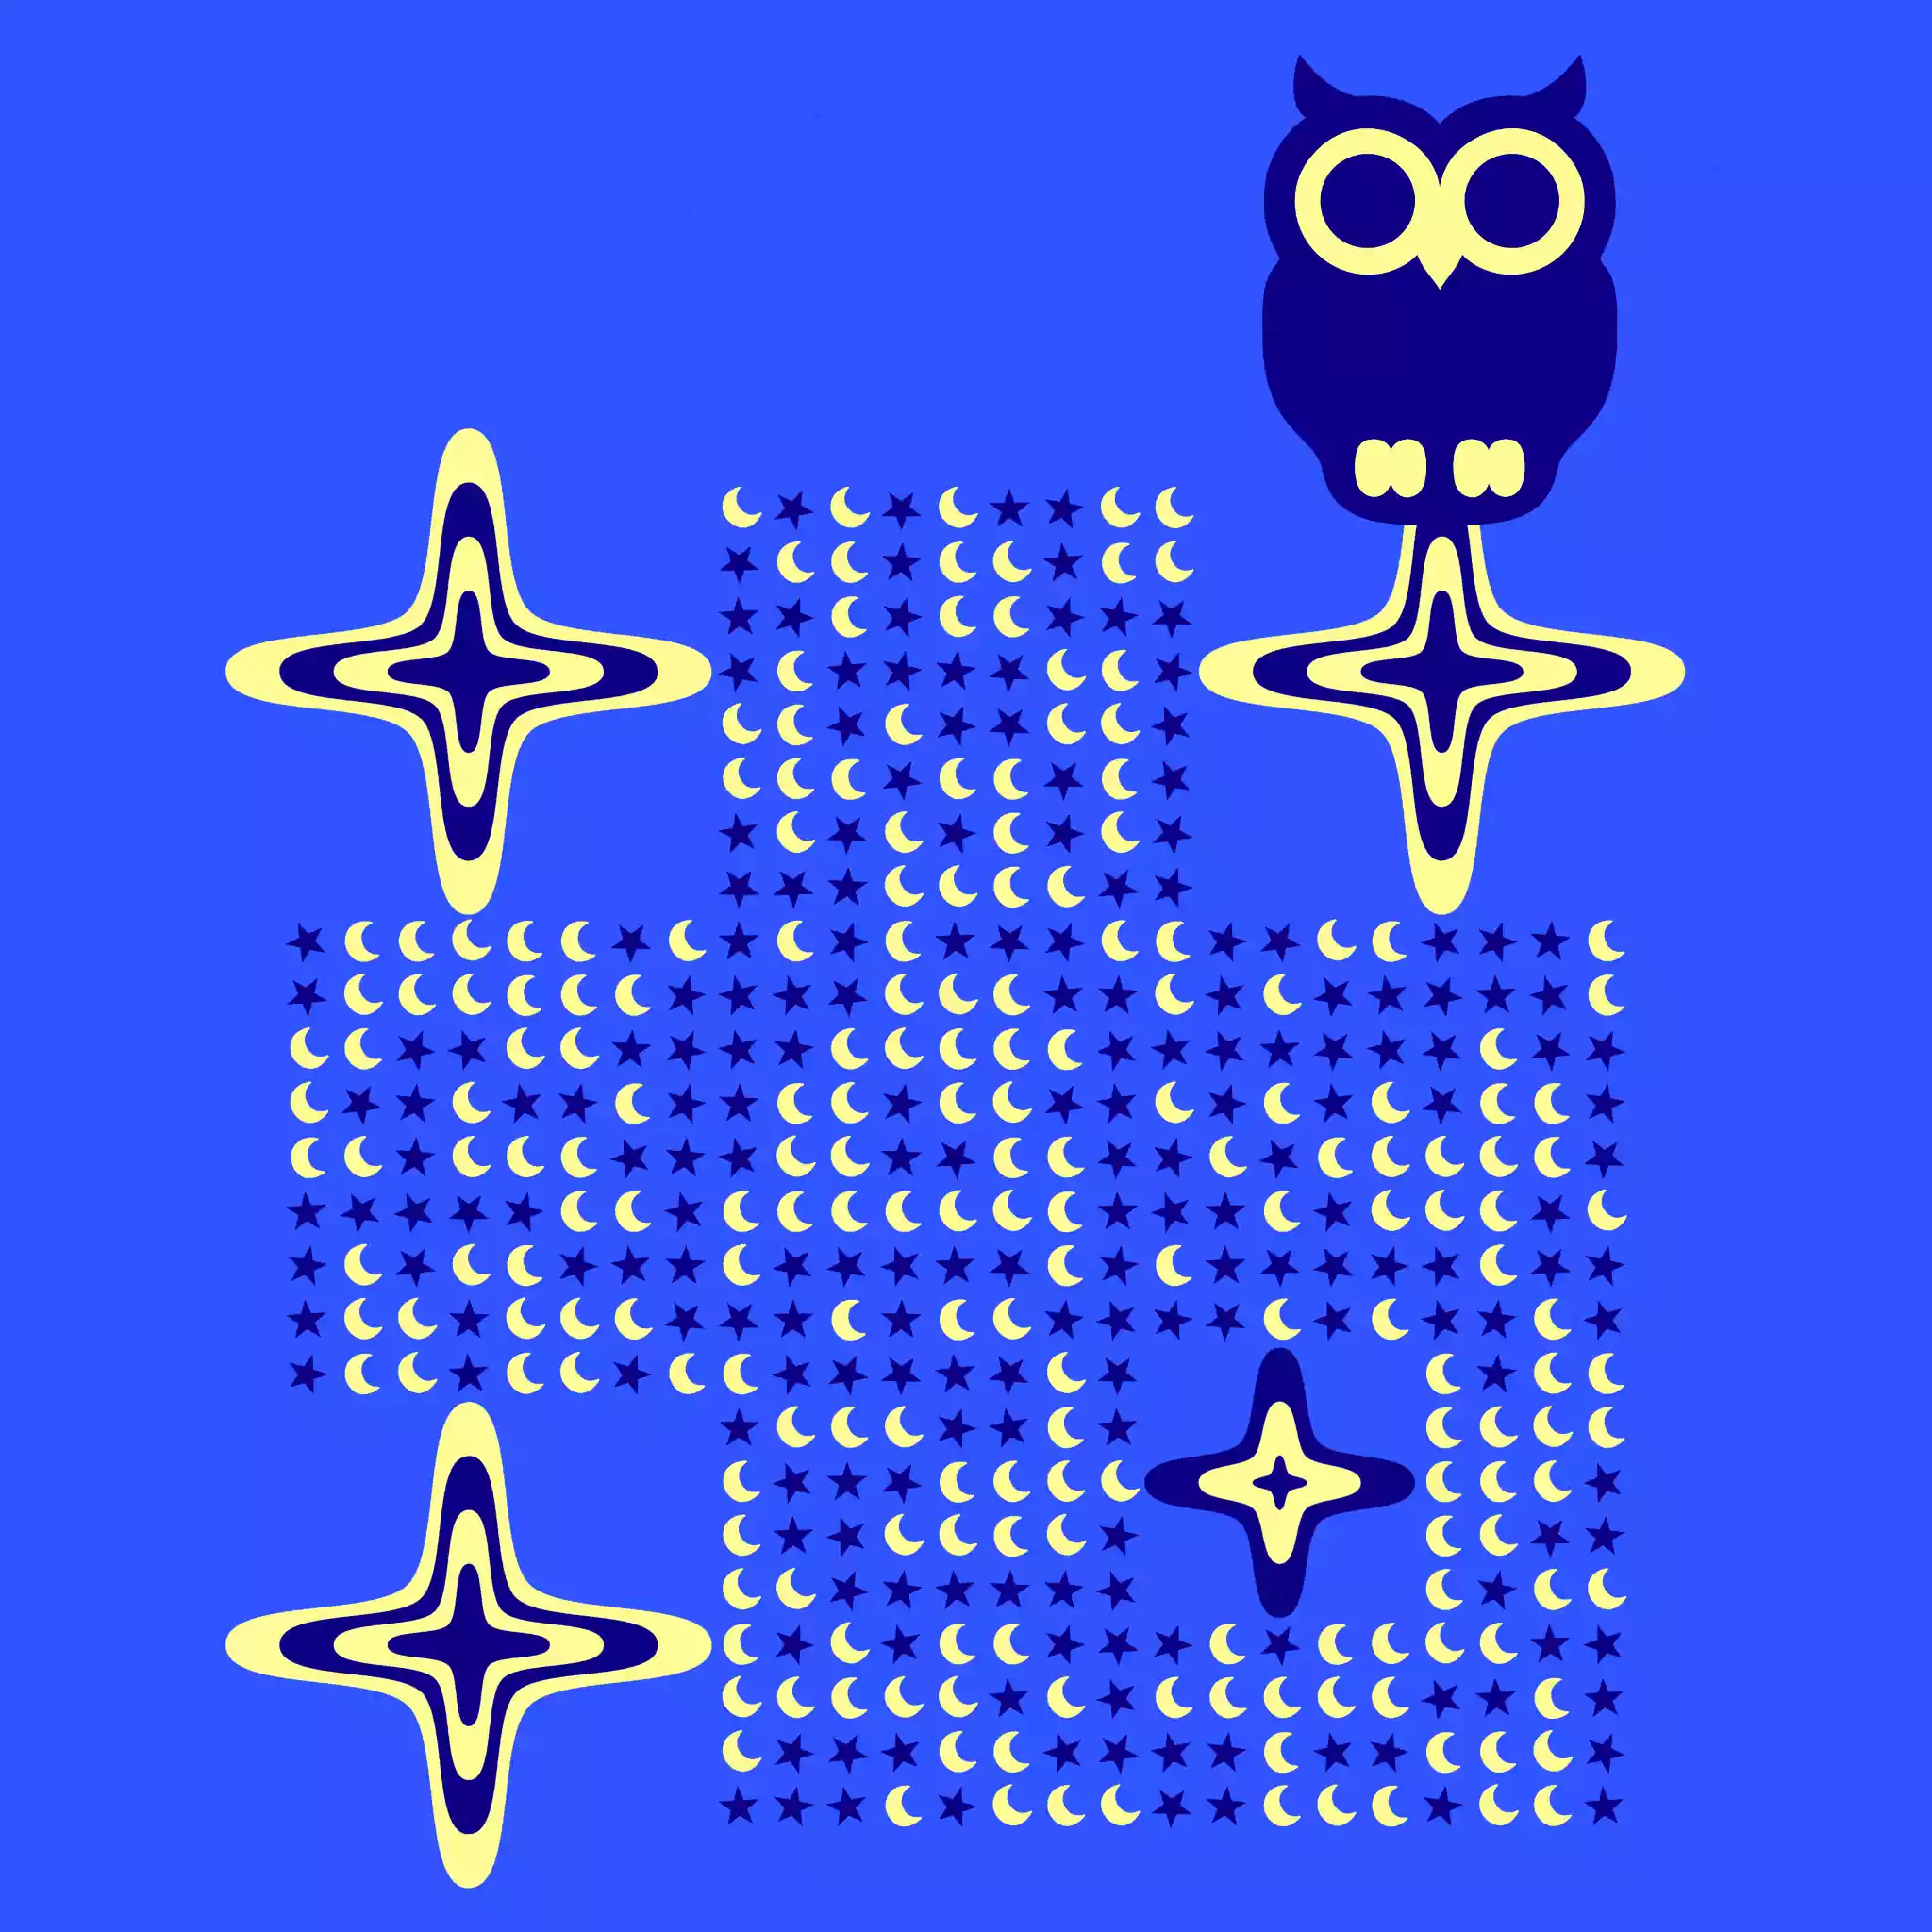 QRcodeLab qr generator and image editor - stars and moon QR code with an owl as logo